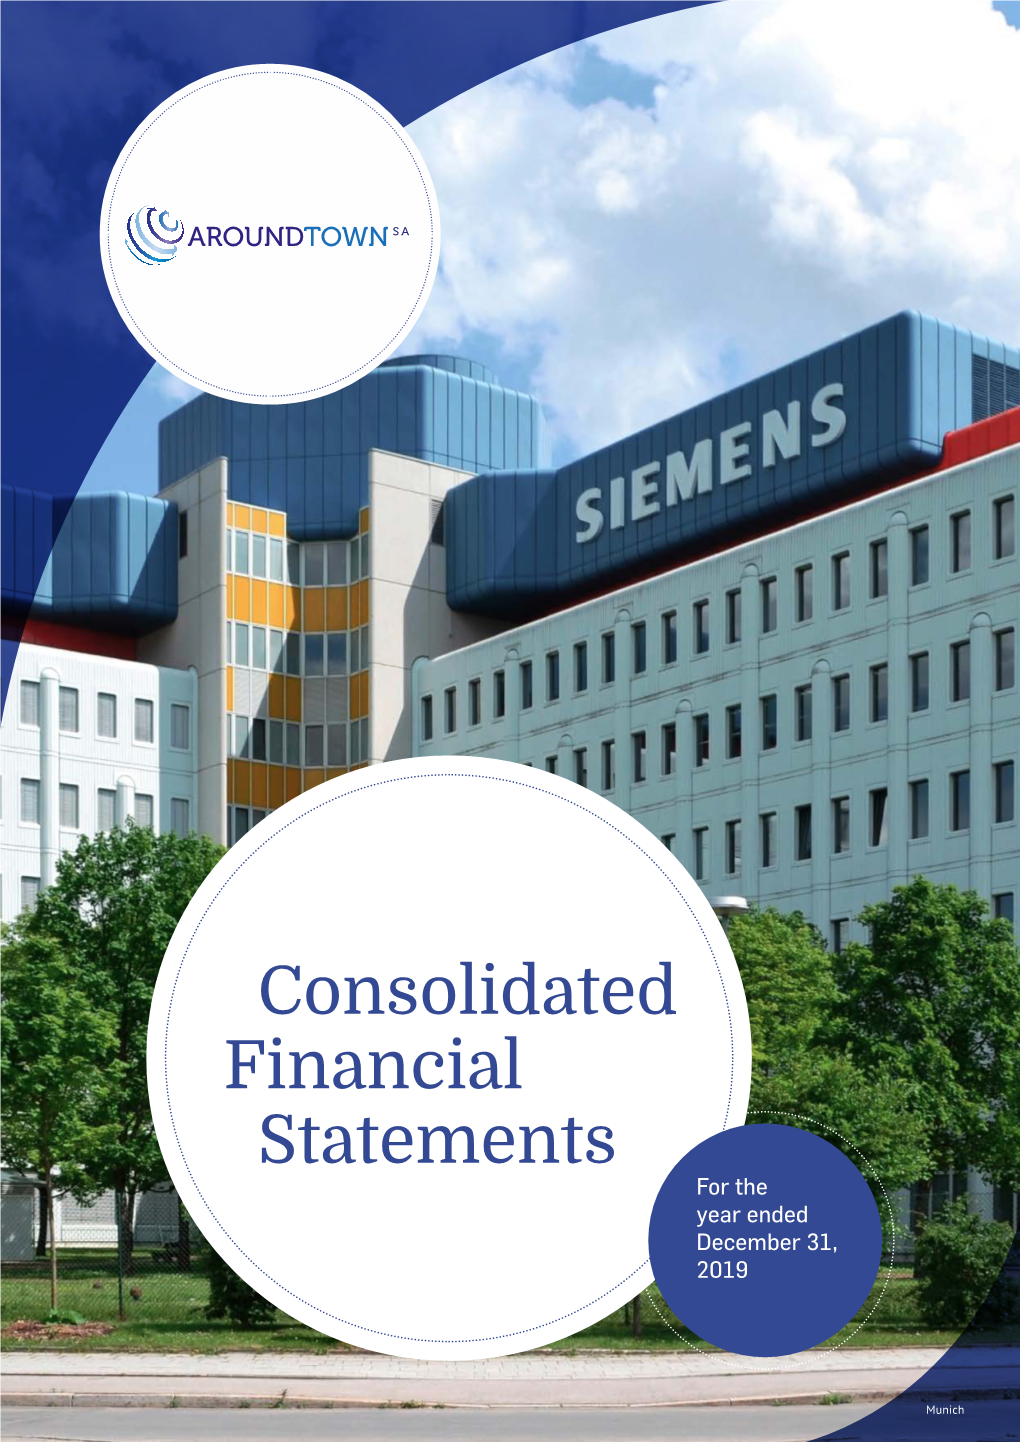 FY 2019 Consolidated Financial Statements 14.90 MB